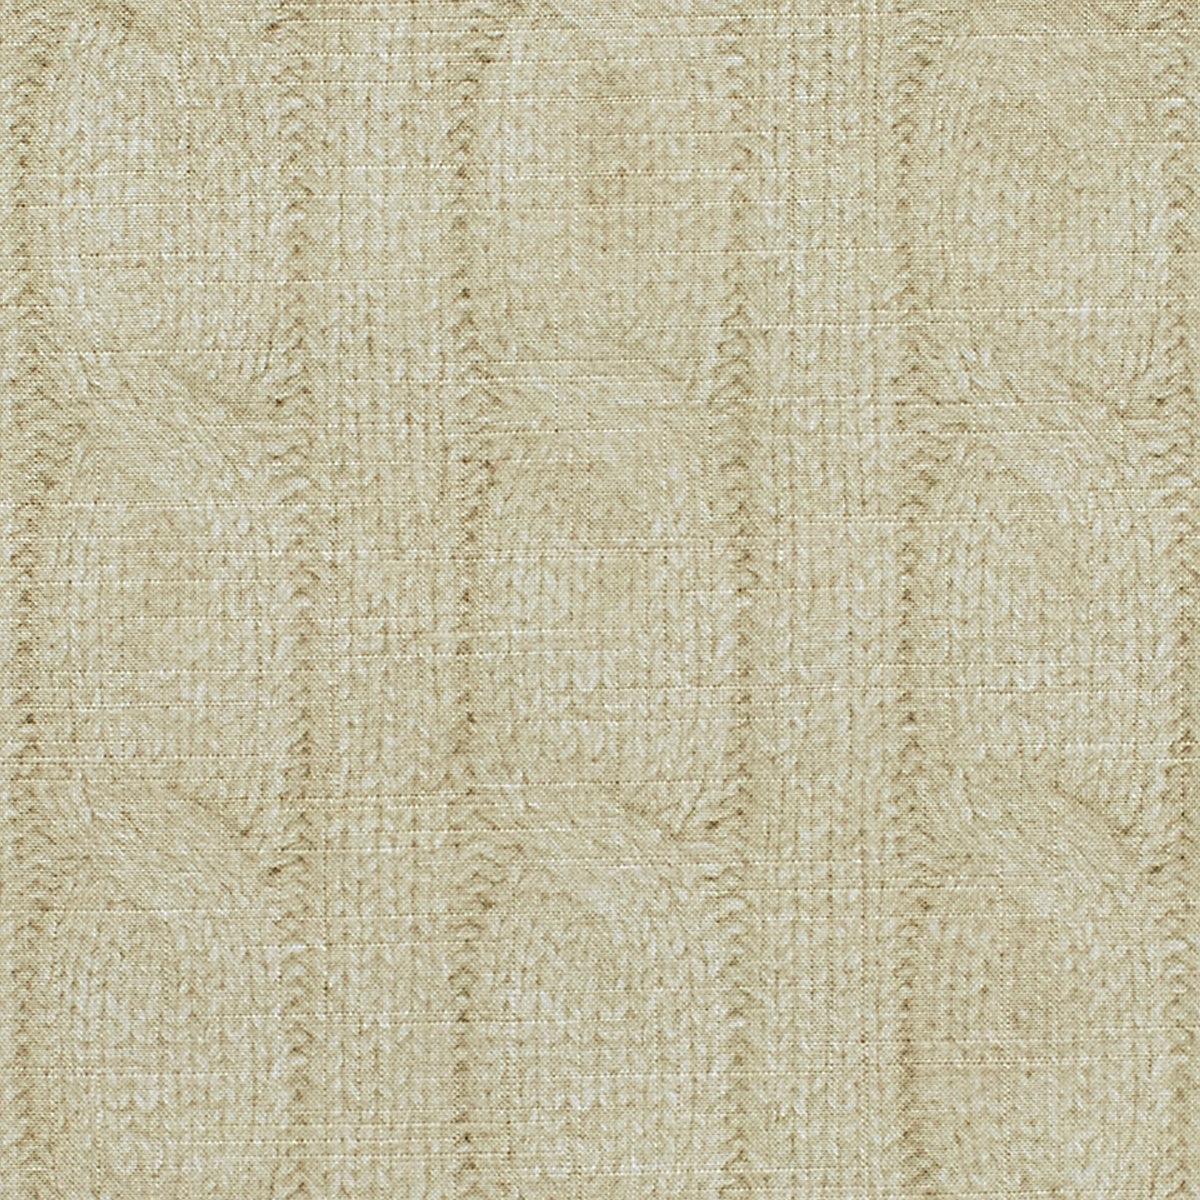 Purchase 9064 Cable Knit Phillip Jeffries Wallpaper